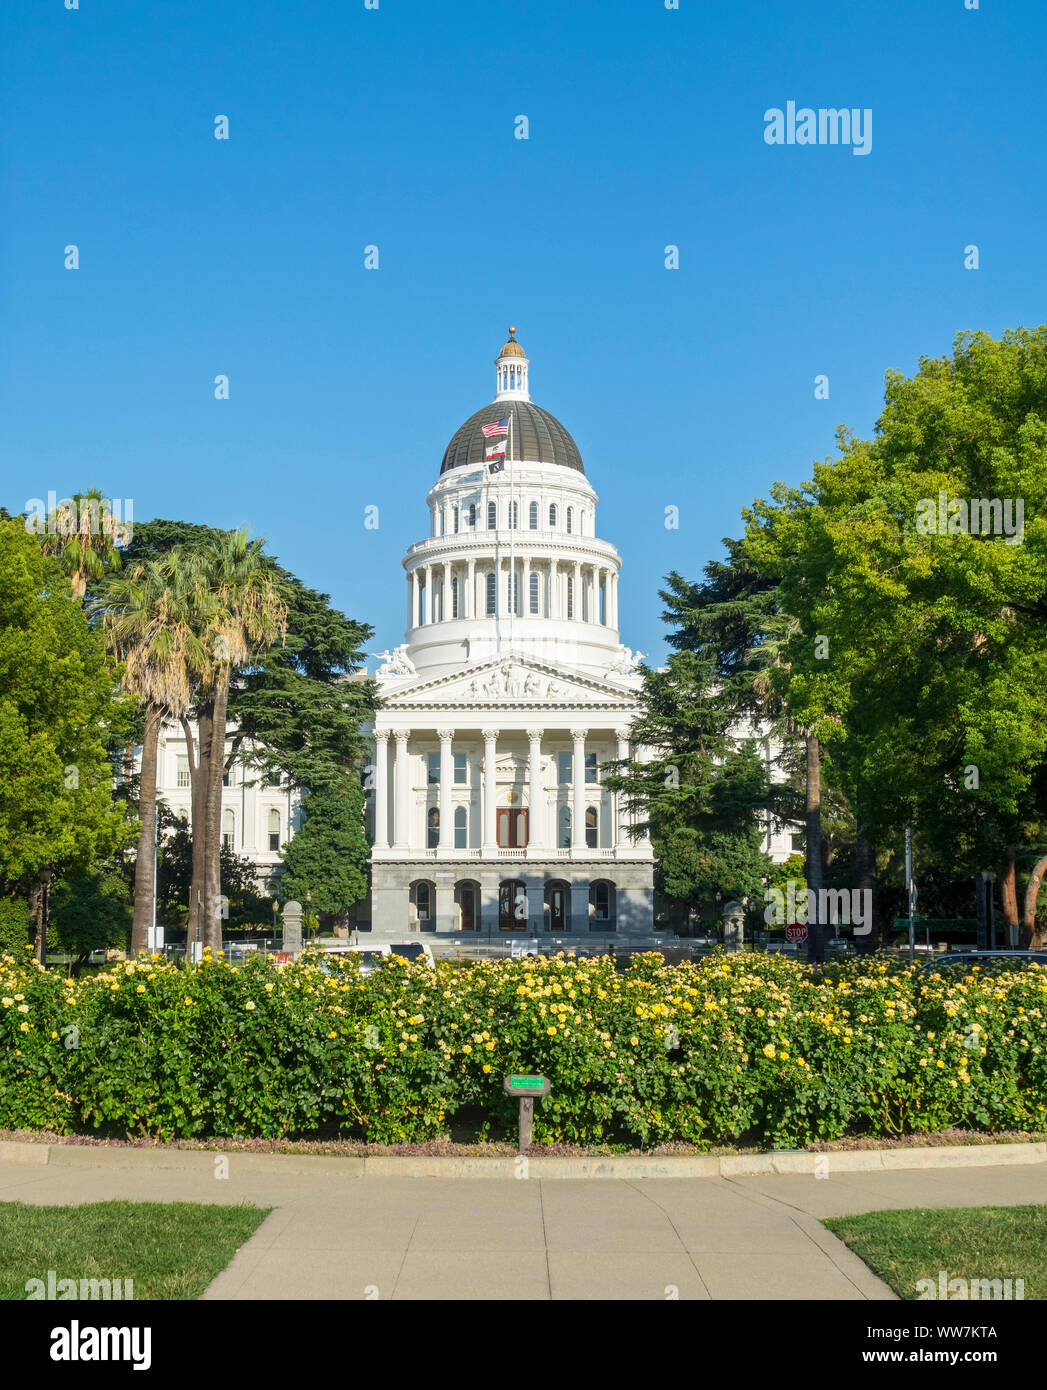 USA, California, Sacramento, California State Capitol, in the building there is the office of the governor of California Stock Photo